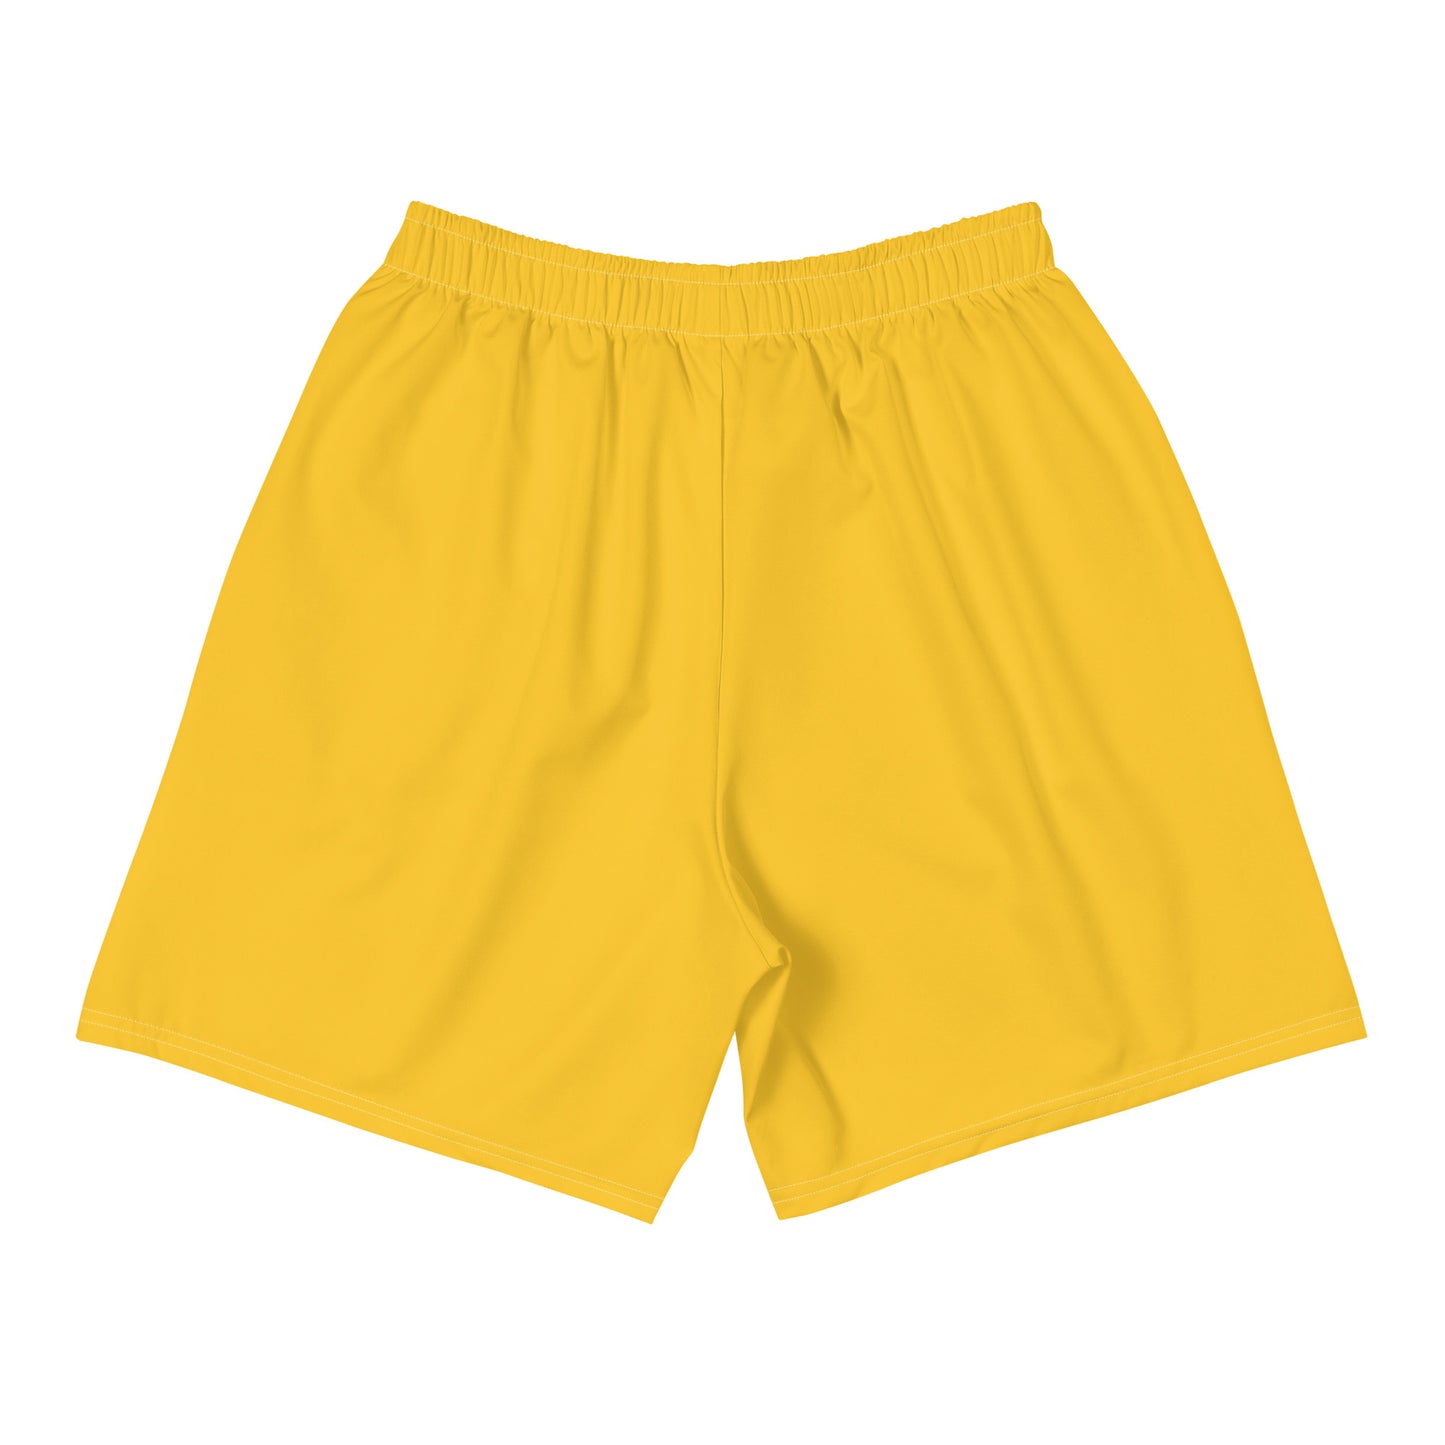 Yellow Hip Suffer Athletic Shorts